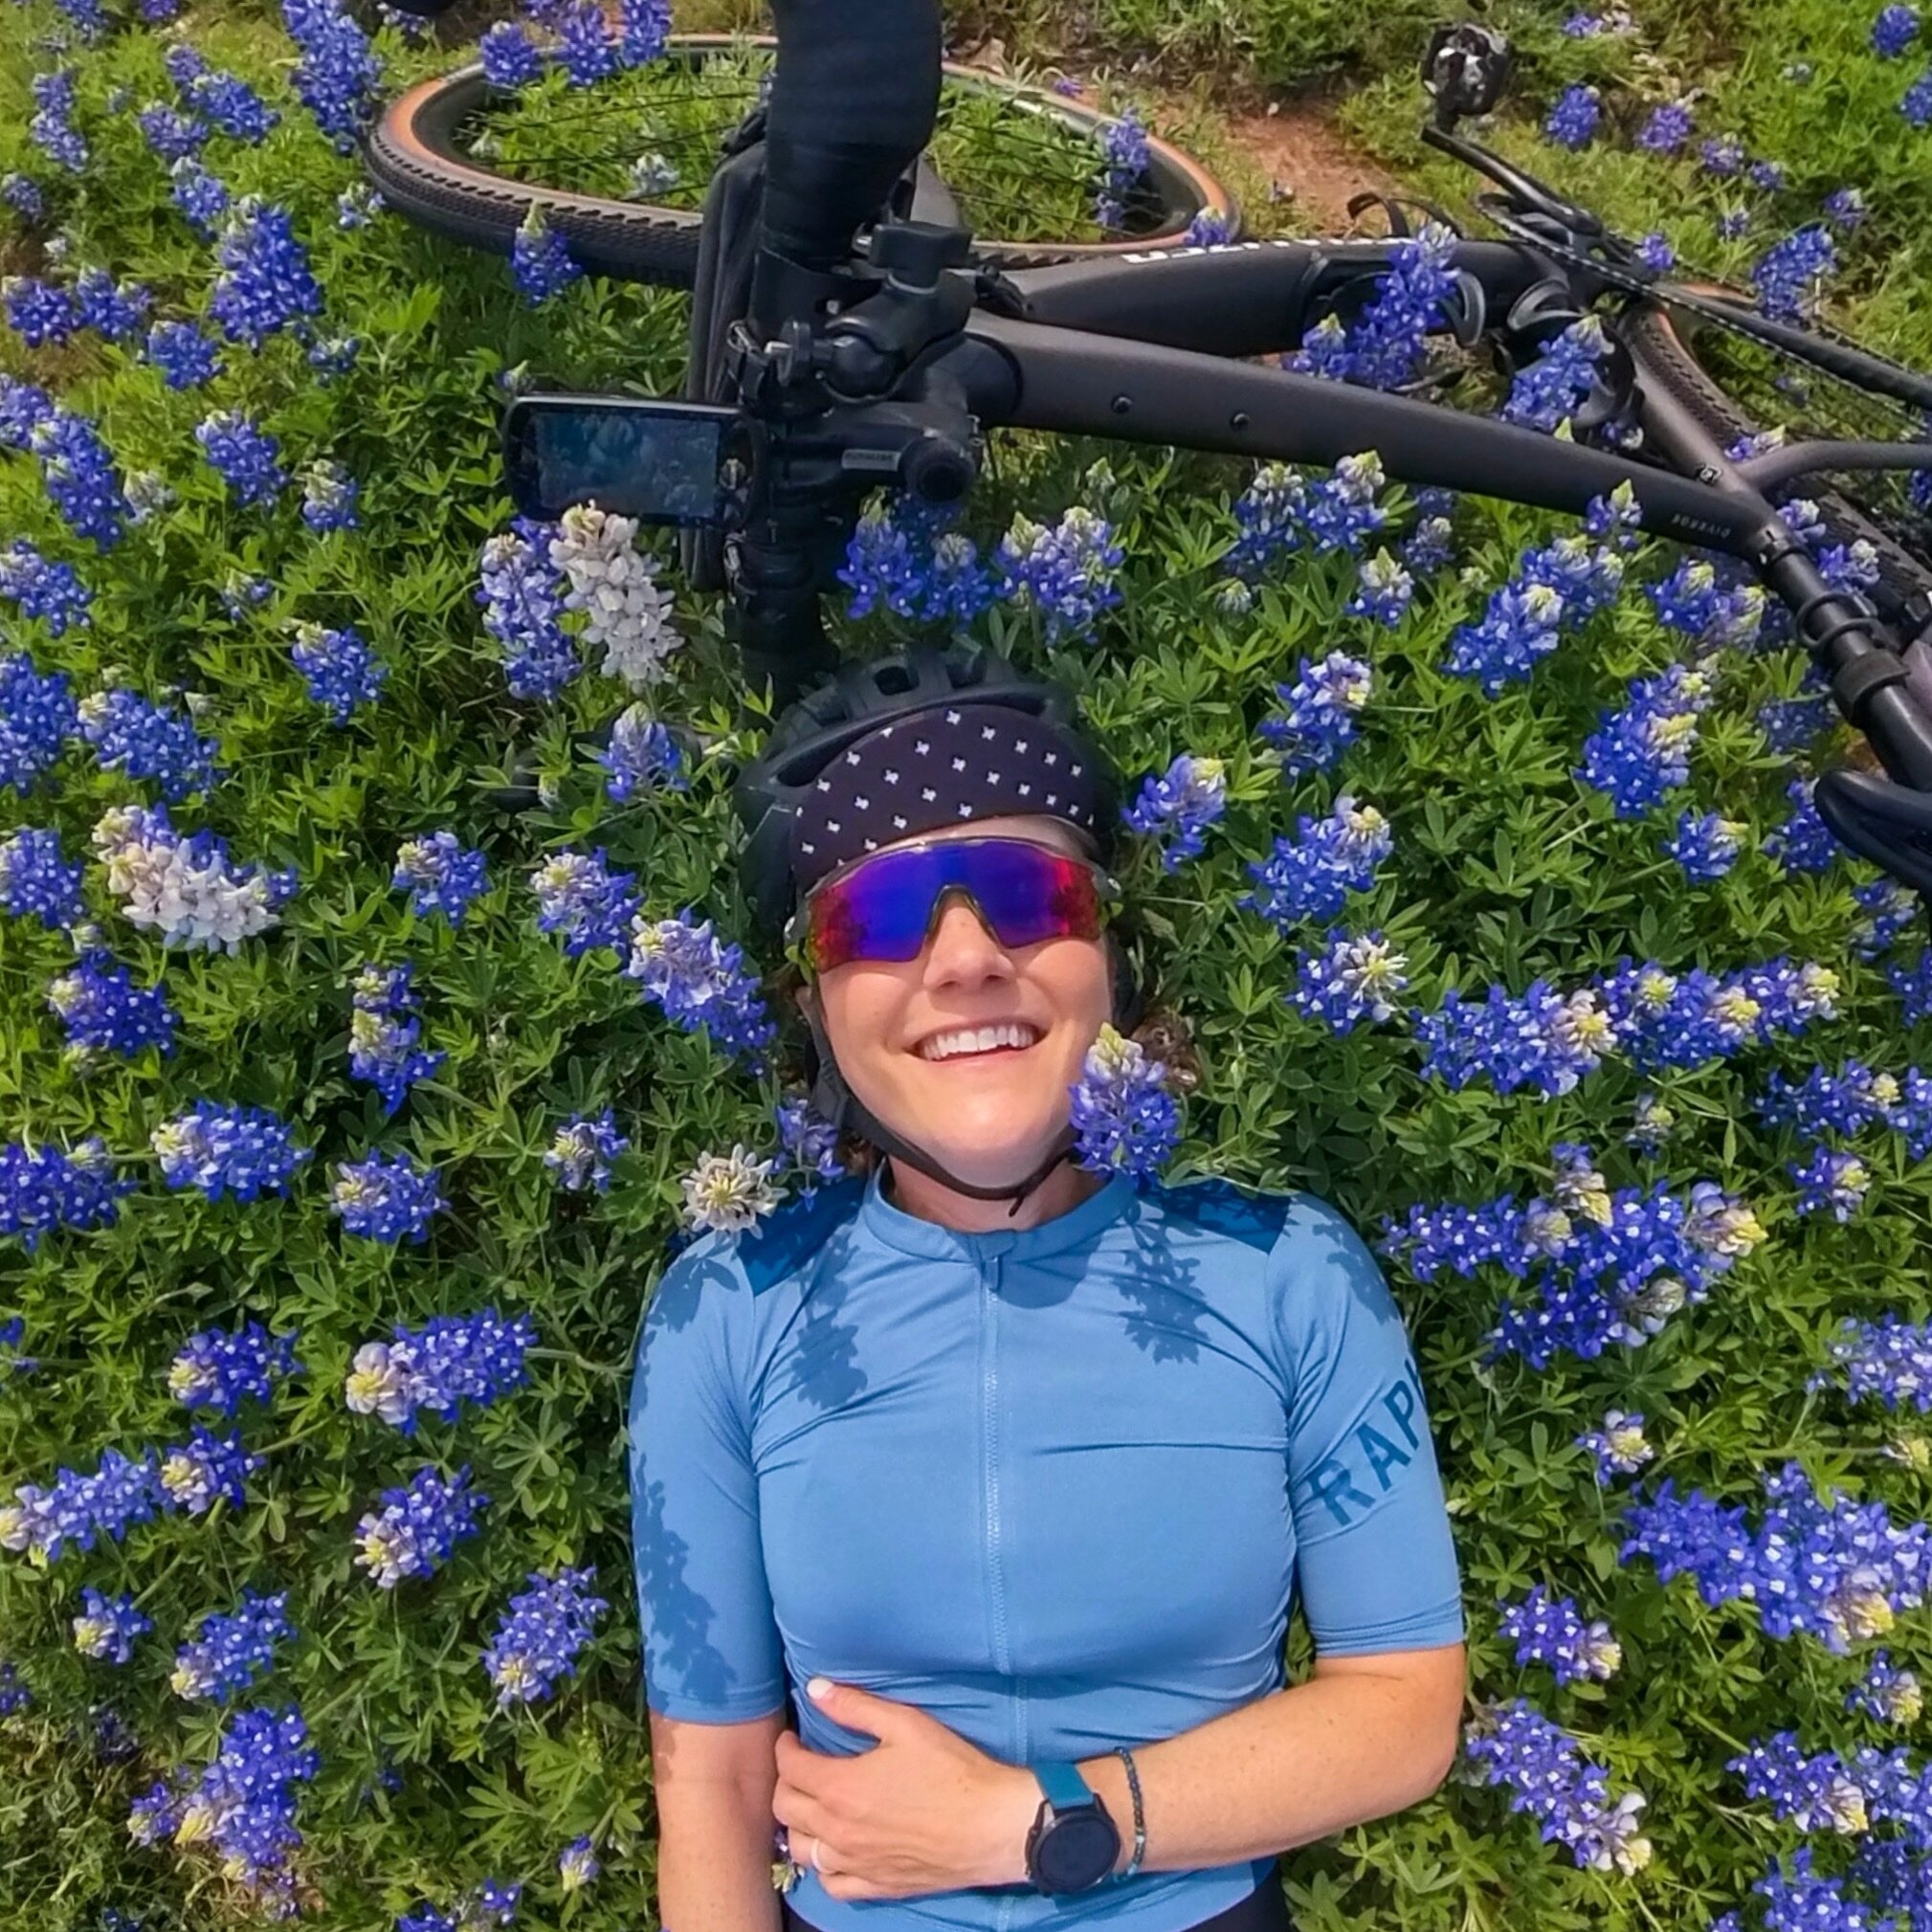 Some bluebonnets were squished making this photo&hellip; do I get arrested or what? 😅🫣

#insta360 #bluebonnets #cycling #texas #straighttojail